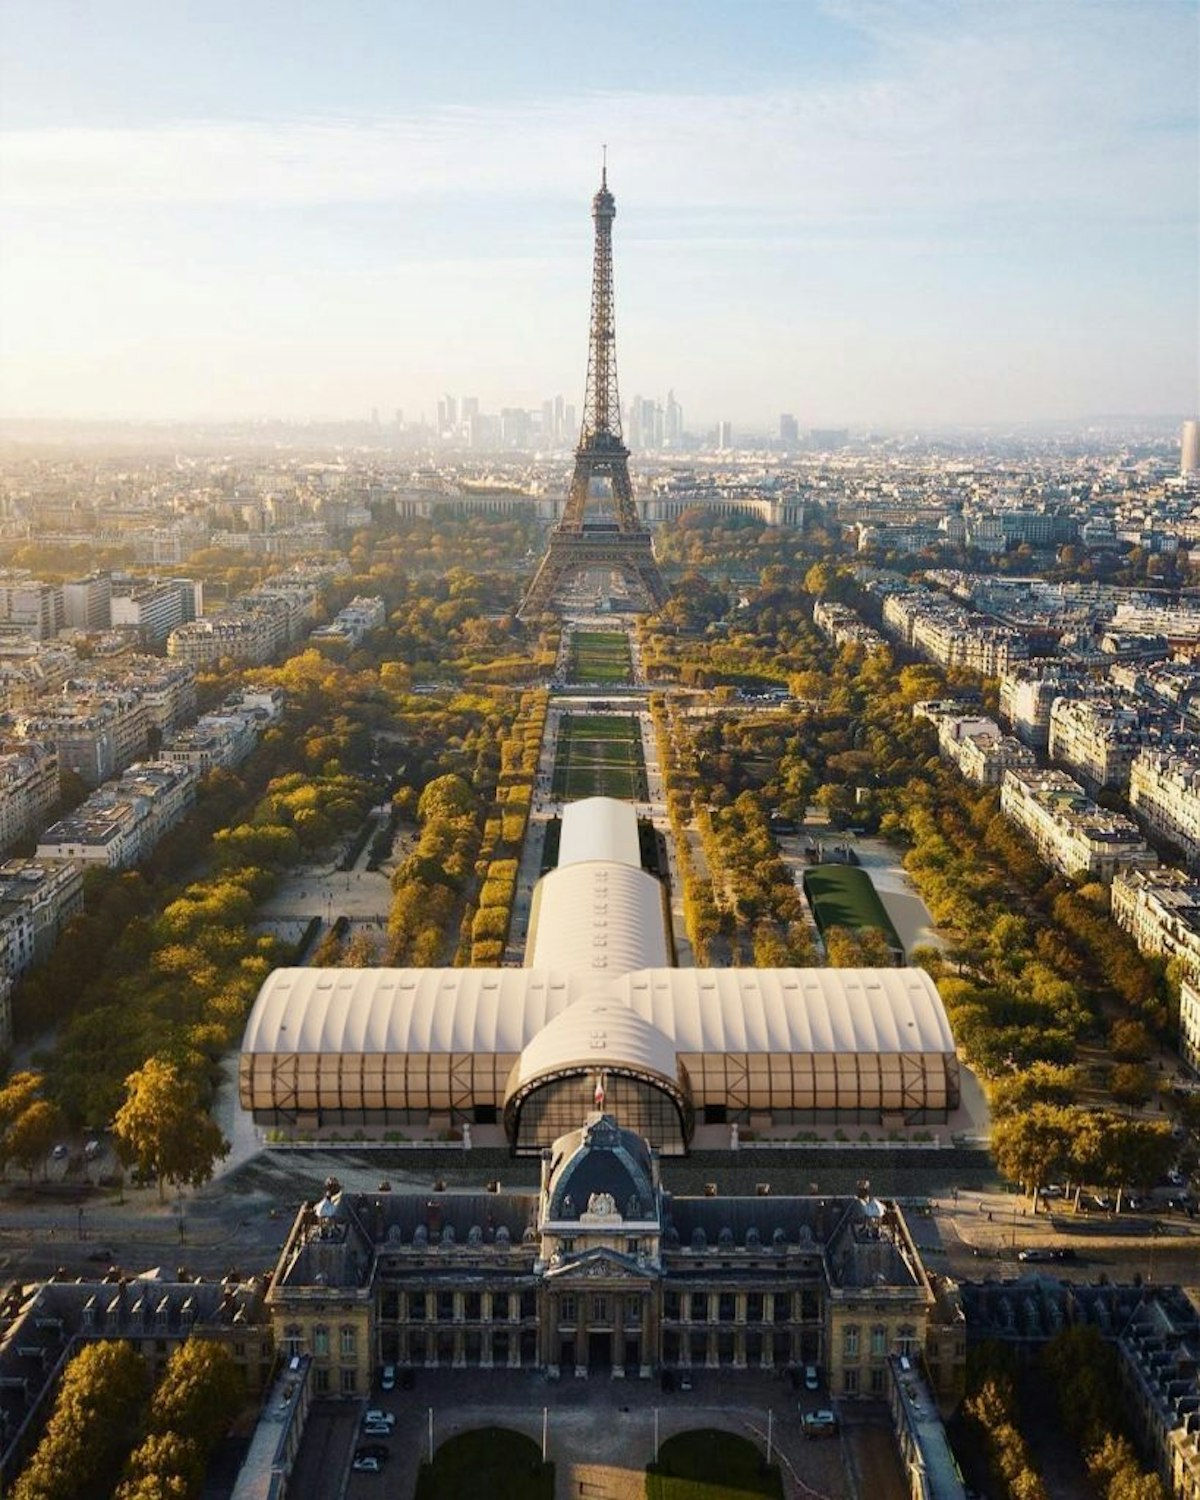 Louis Vuitton Is Turning Their Paris Head Office Into A Hotel - Grazia  Singapore